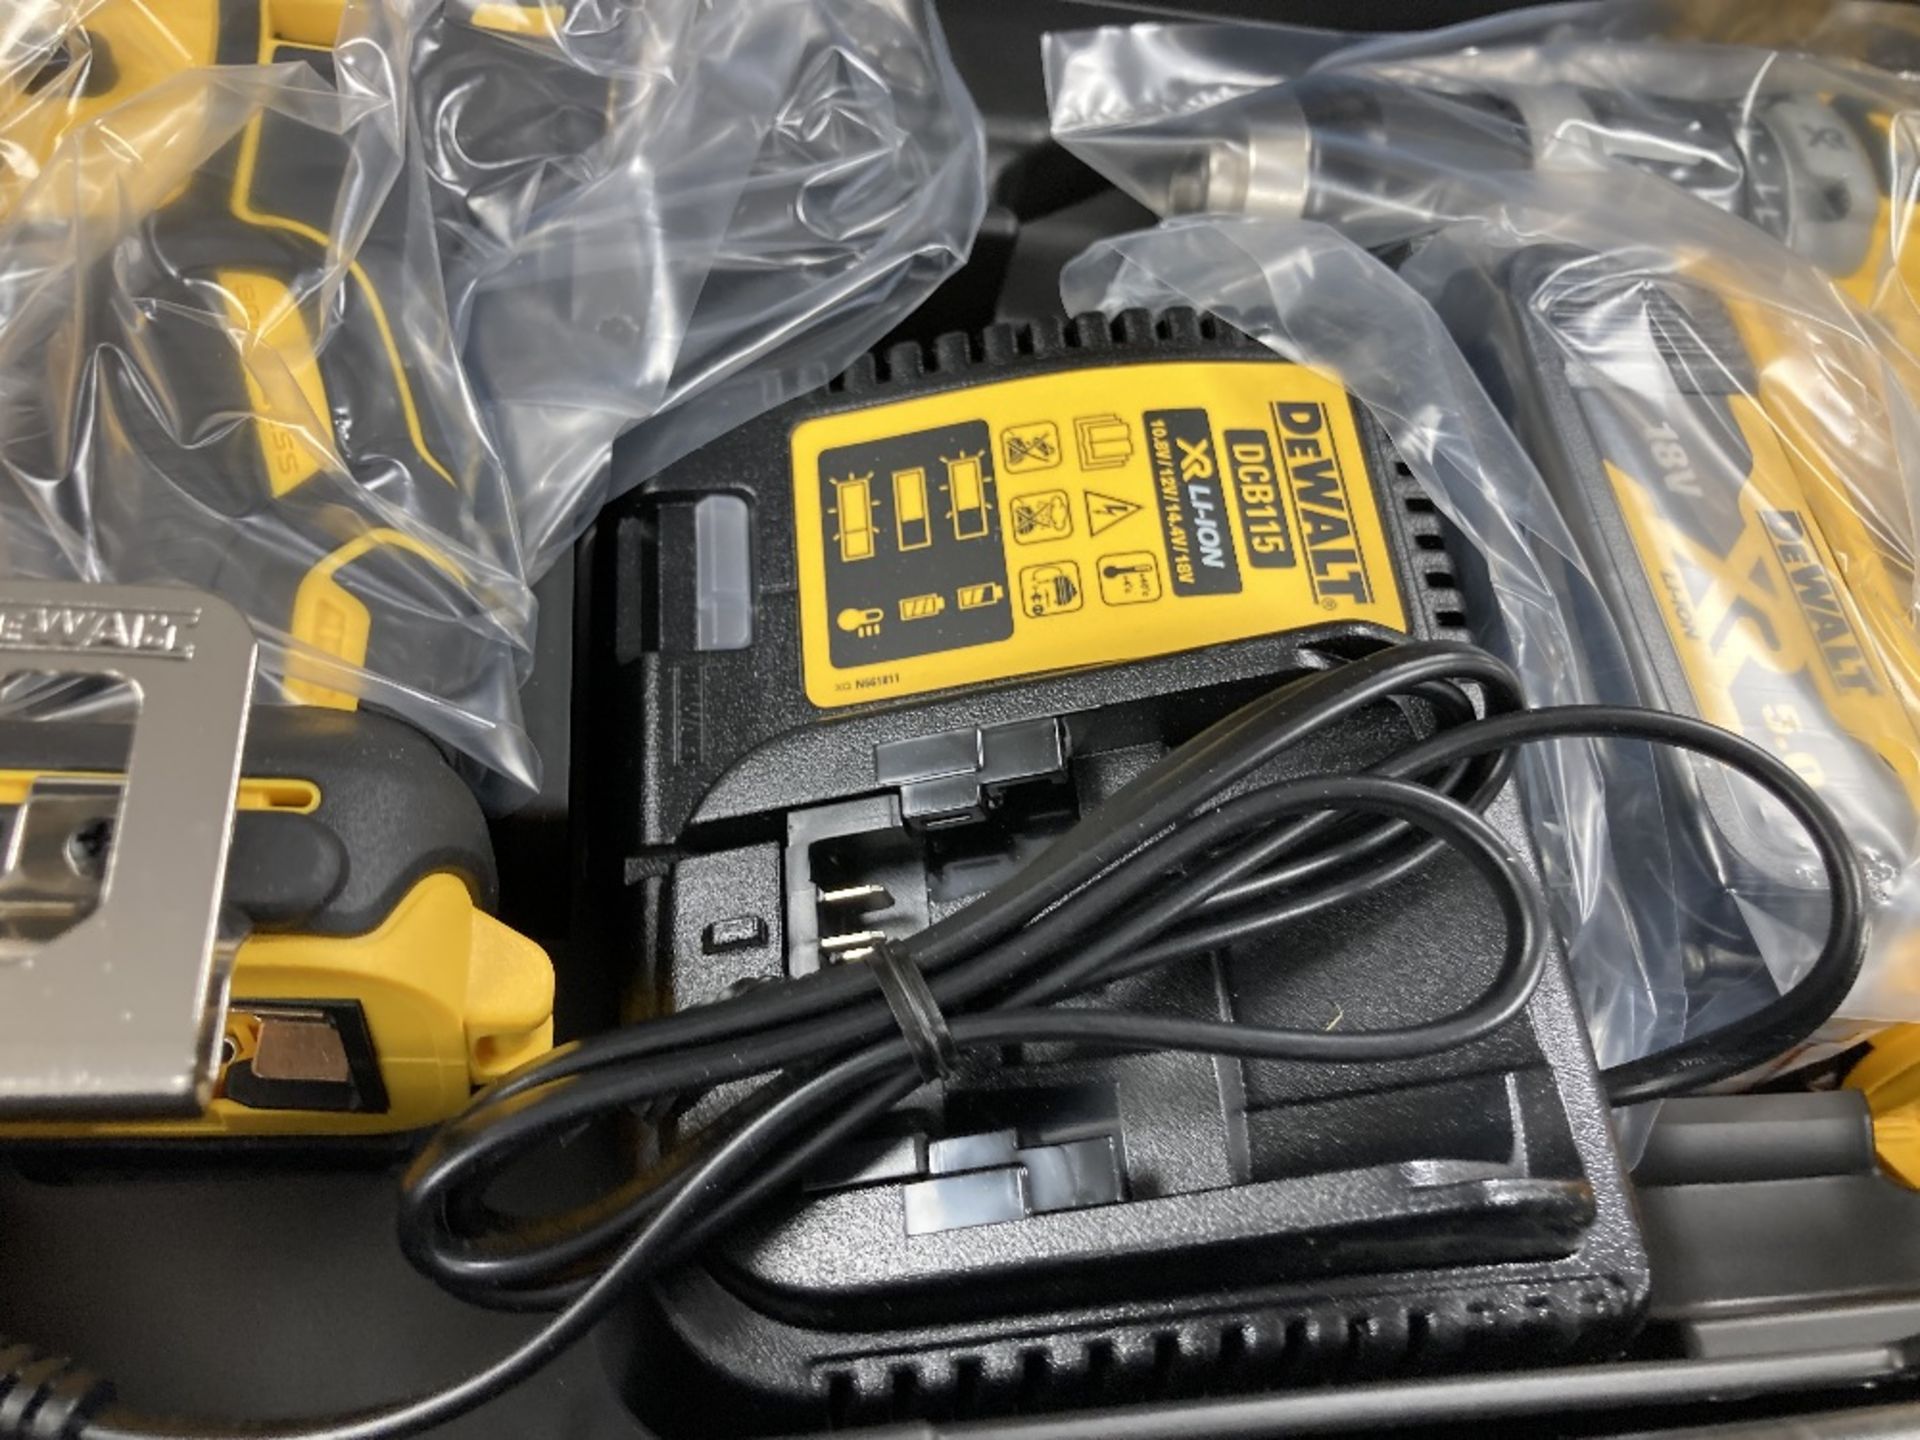 DeWalt DCK266P2-GB 18V XR Brushless Combi Drill & Impact Driver Twin Kit with 2x 5.0Ah Batteries - Image 6 of 7